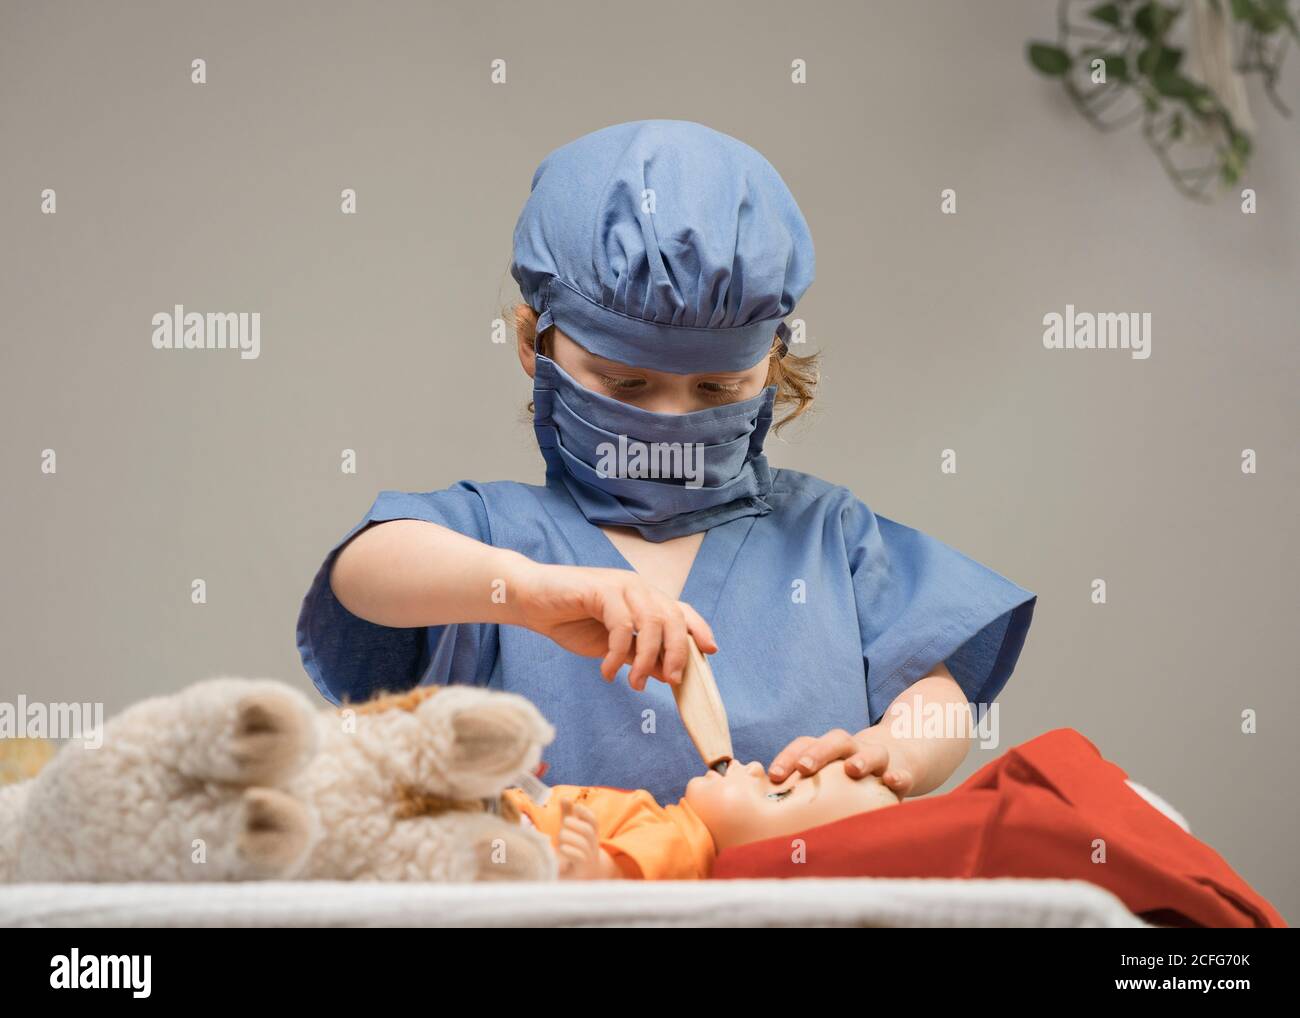 young child wearing medical PPE examines a baby doll by checking it's temperature with thermometer Stock Photo